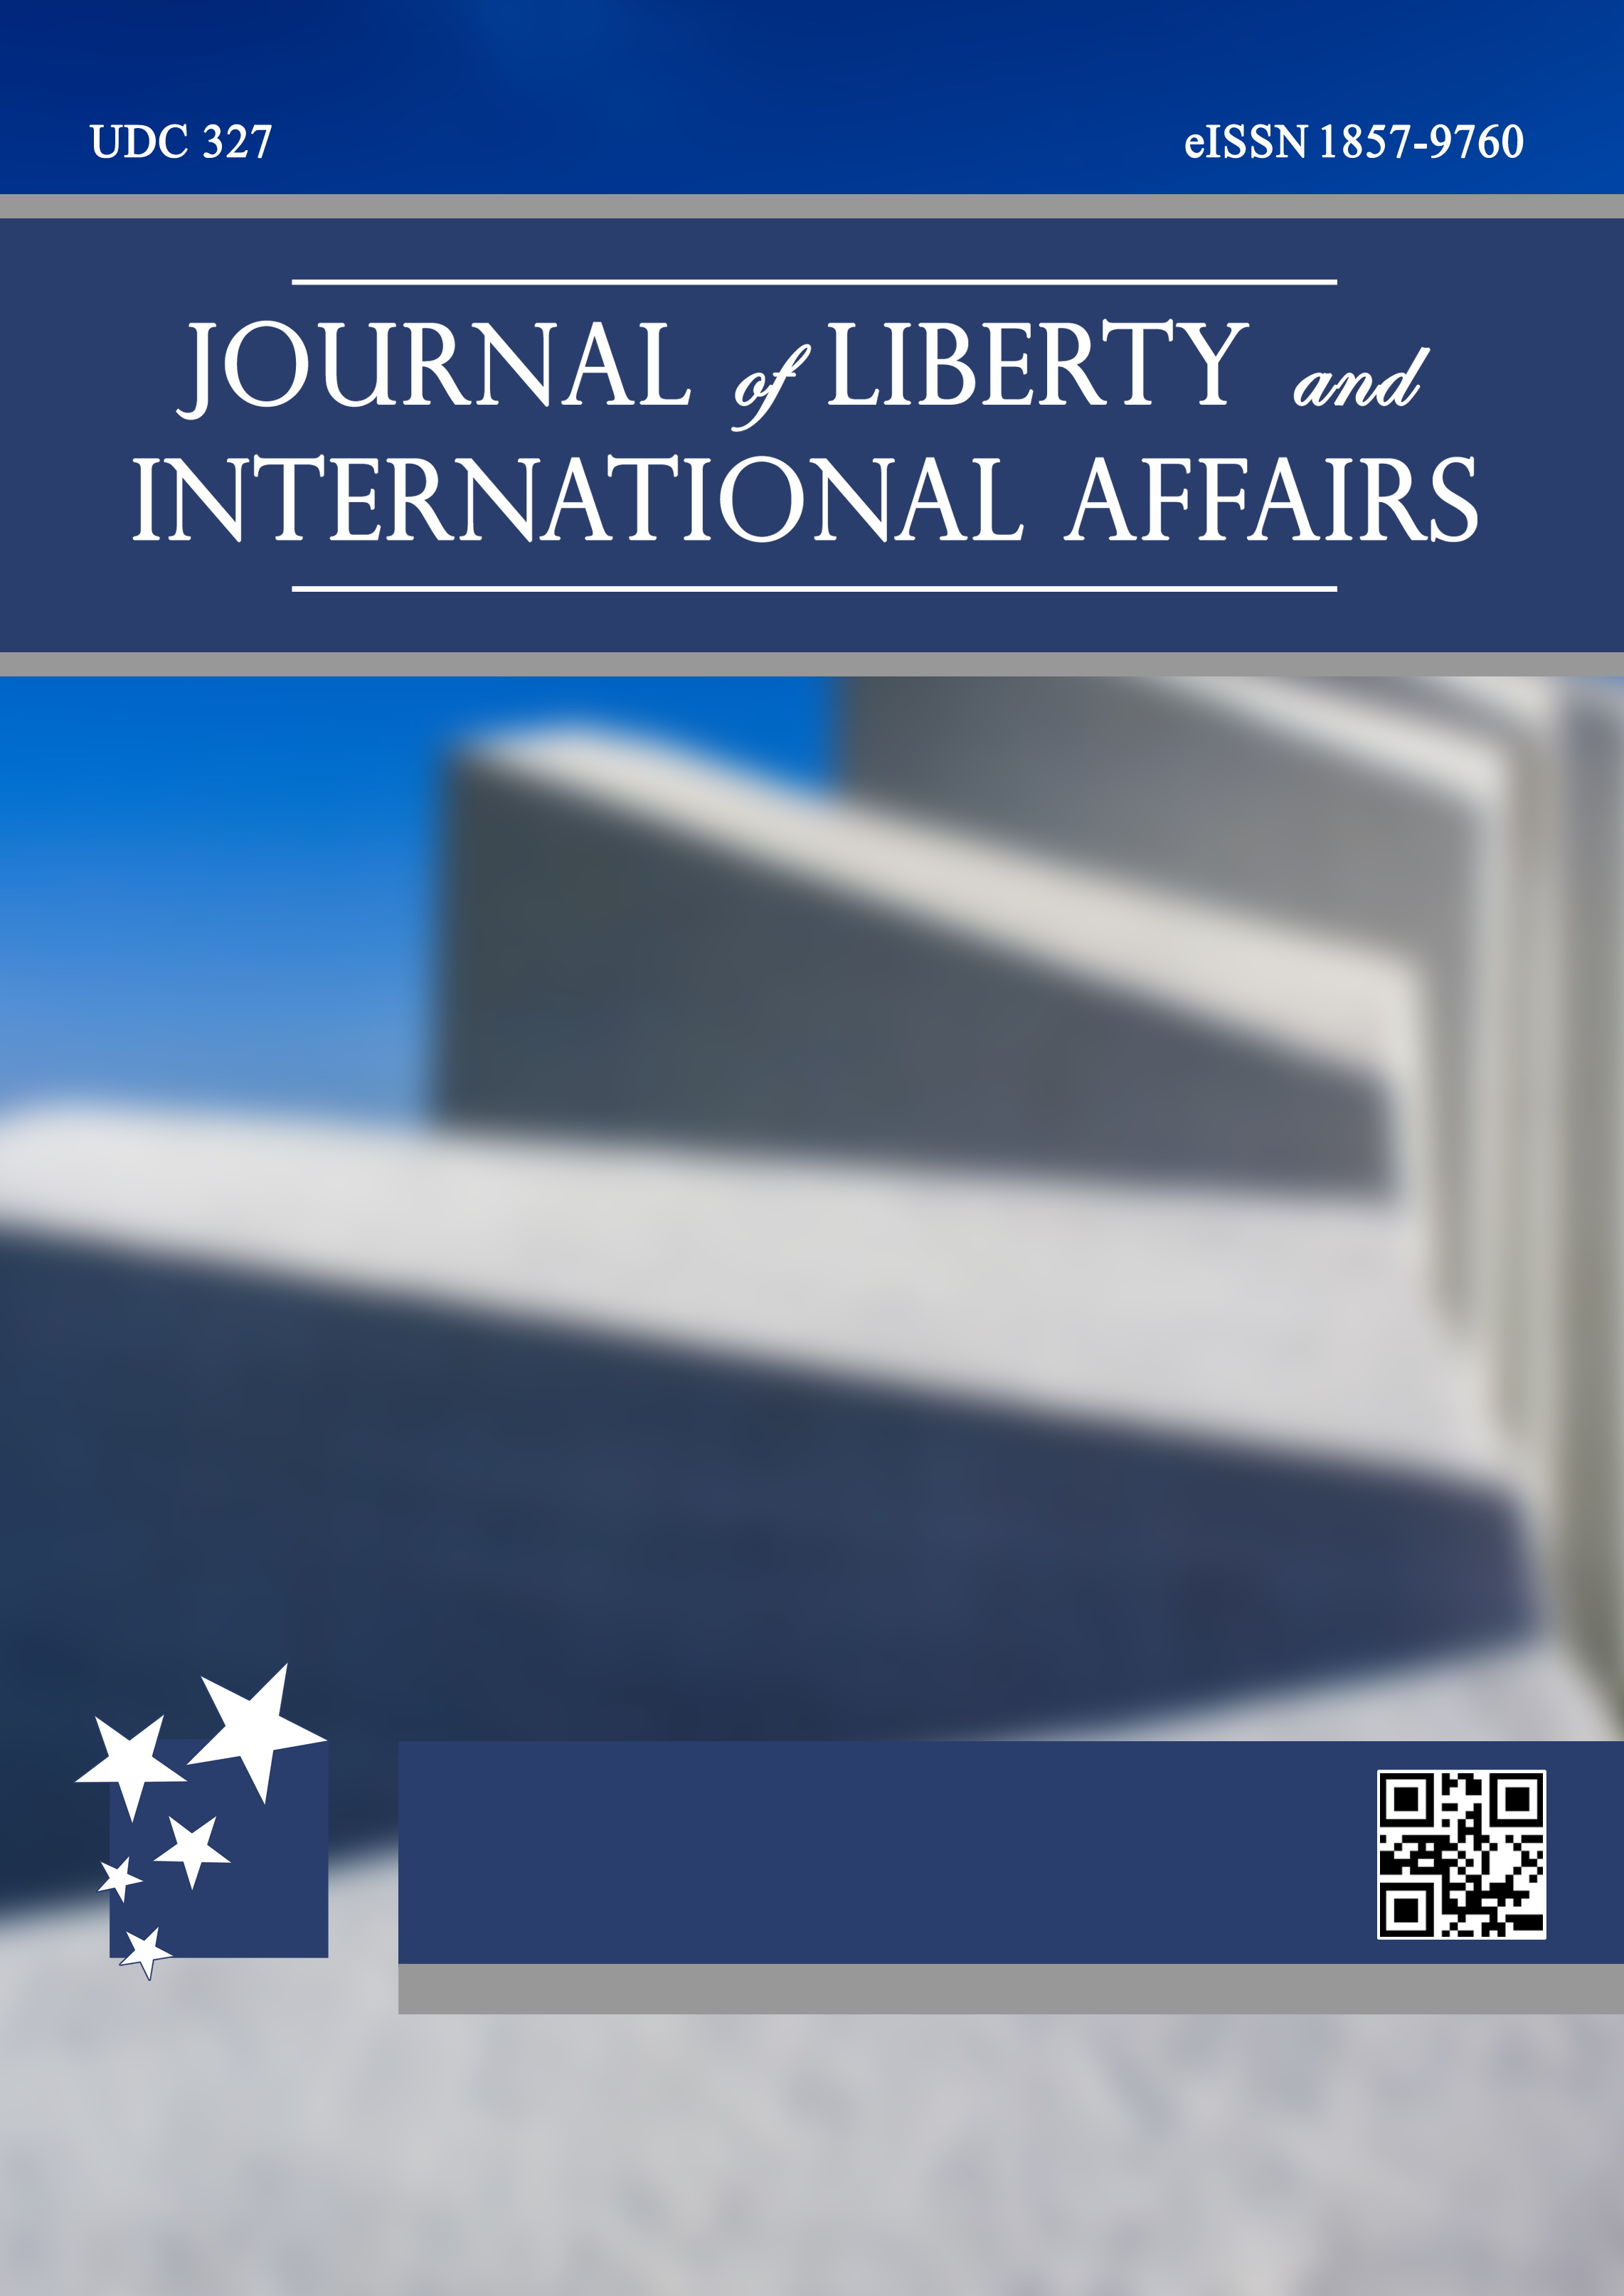 FACTORS THAT CAUSED THE DETERIORATION IN AMERICAN – TURKISH RELATIONS Cover Image